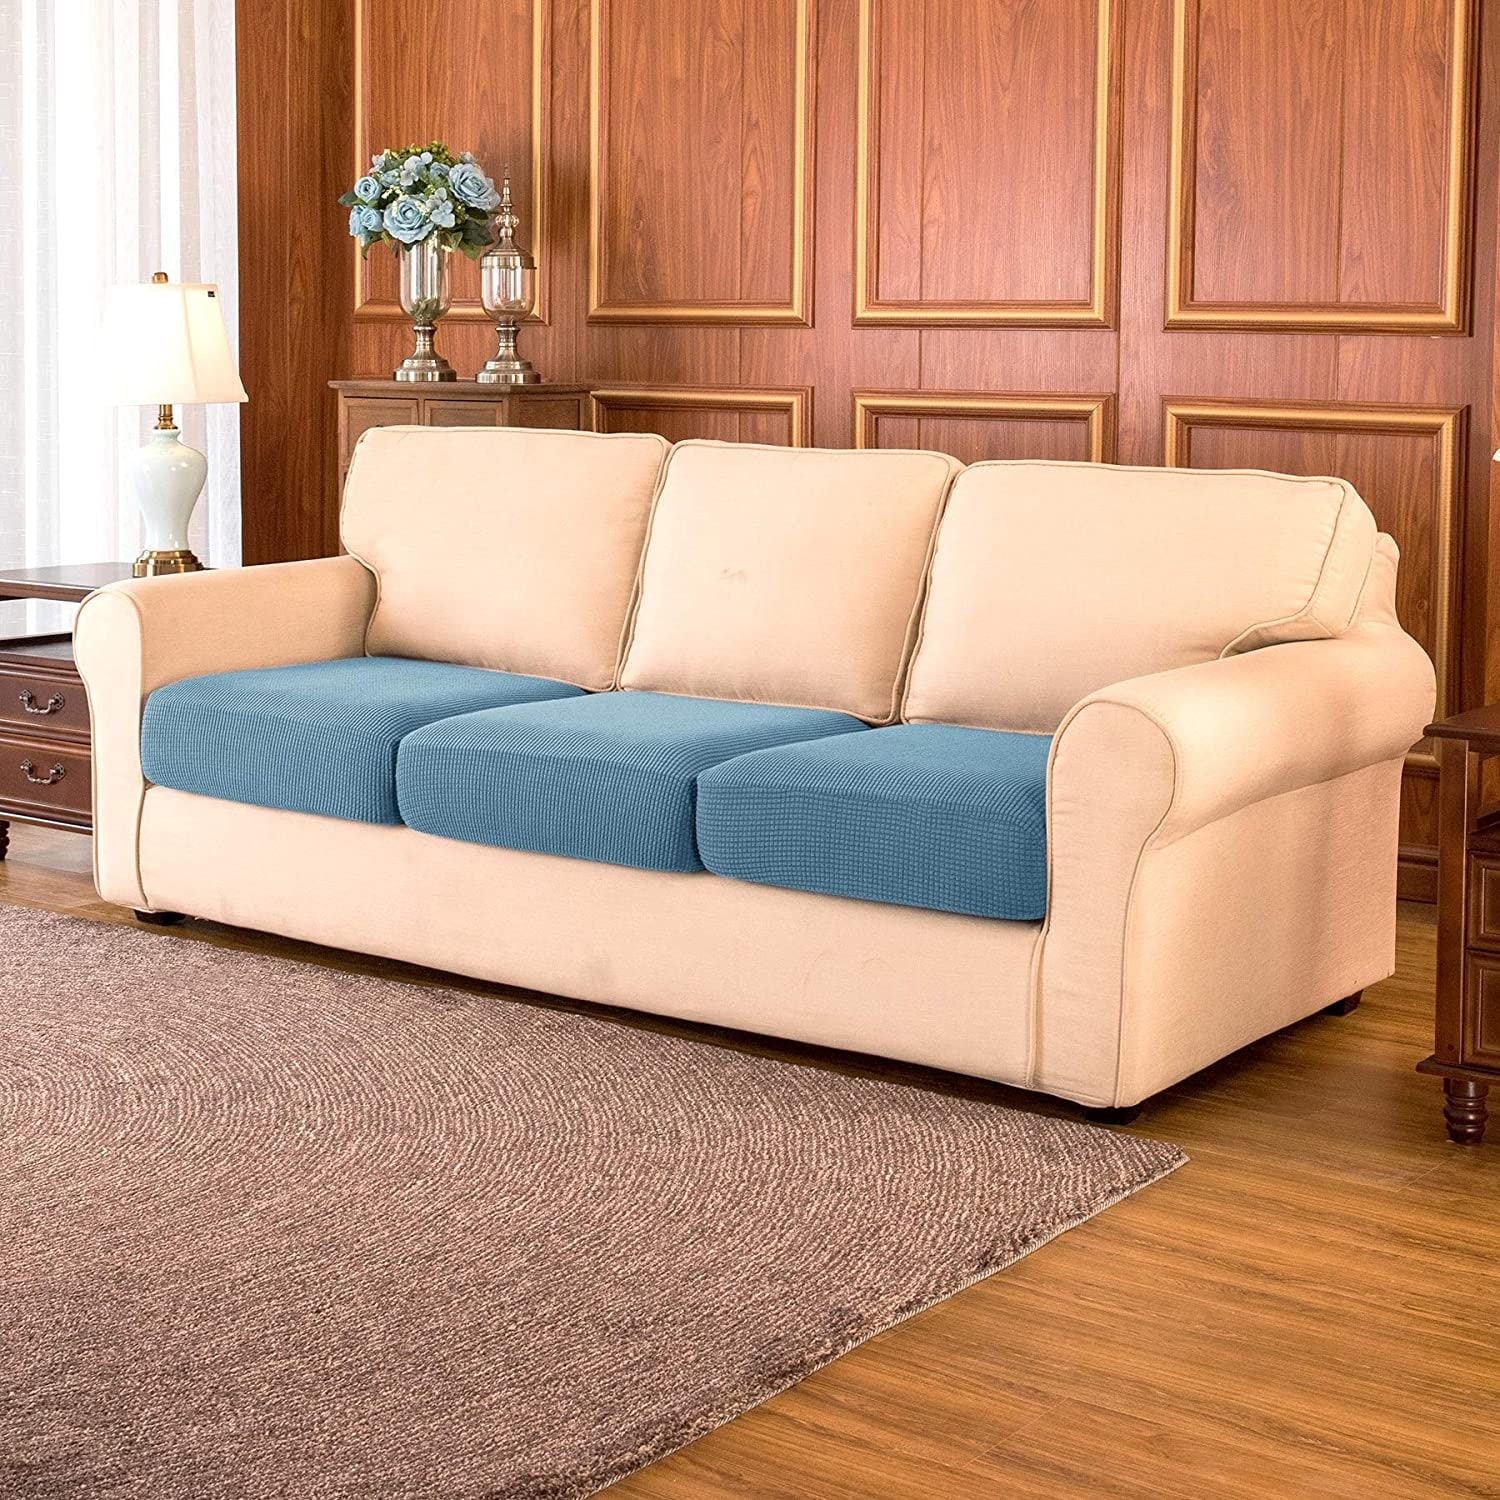 https://ak1.ostkcdn.com/images/products/is/images/direct/c9665df3c41a72ffaa720c9e769532aed6c348d1/Subrtex-3-Piece-Stretch-Separate-Sofa-Cushion-Cover-Elastic-Slipcover.jpg